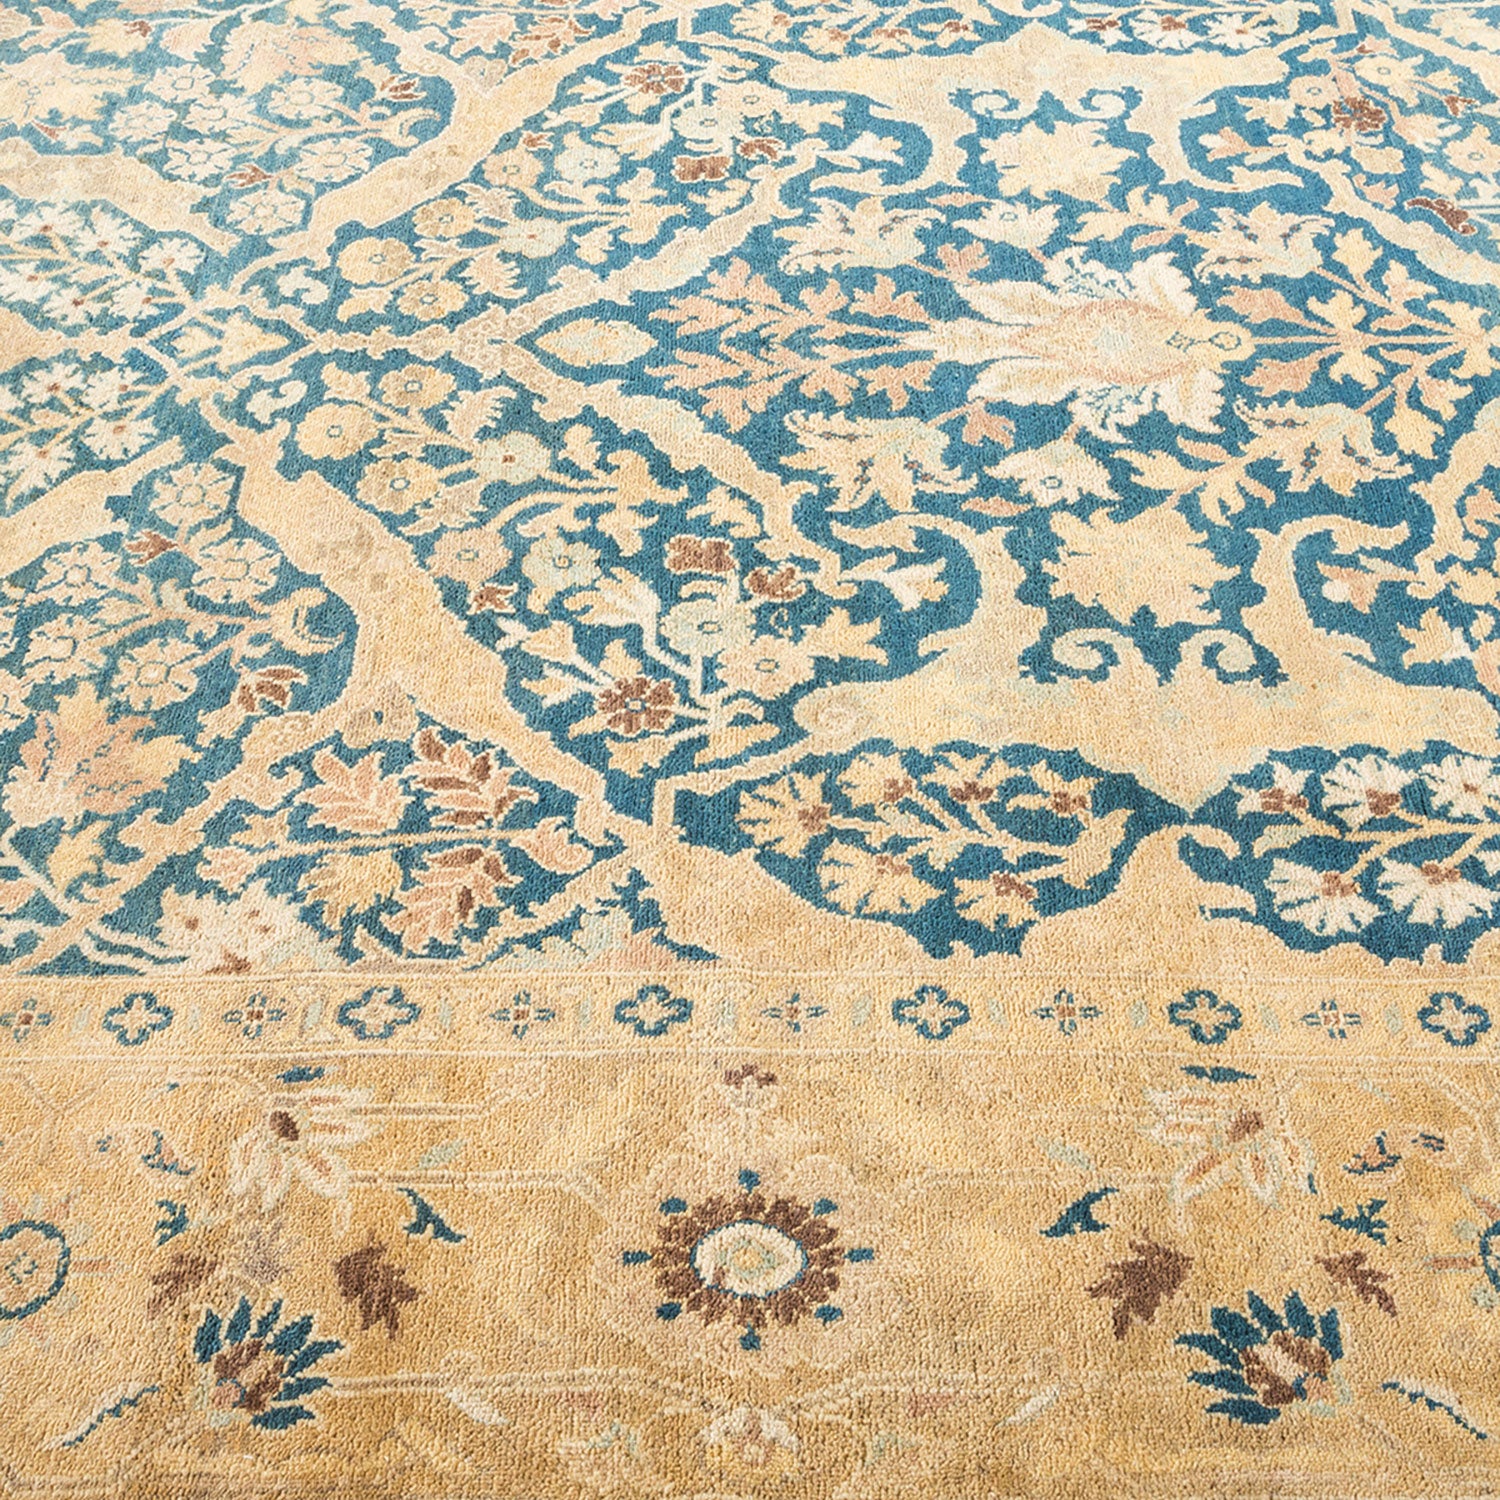 Ornate floral patterned carpet in shades of blue and tan.